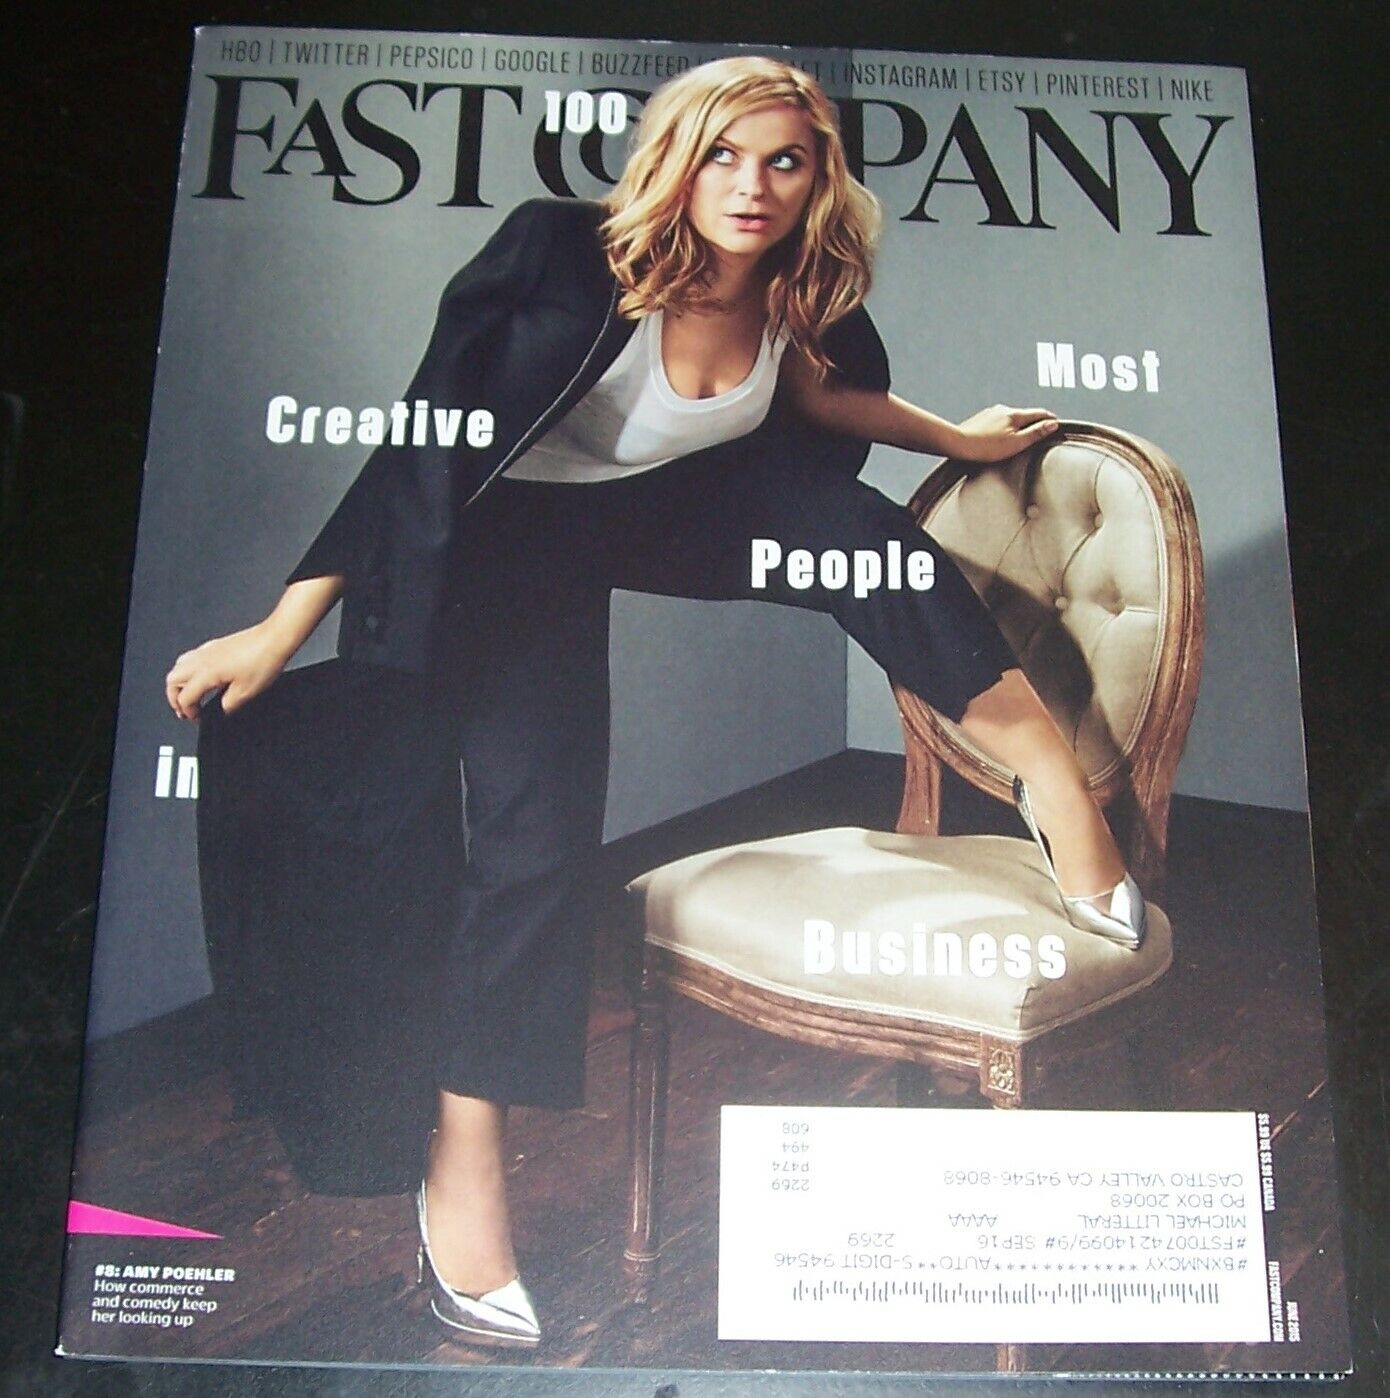 100 Most Creative People In Business, Poehler, FAST COMPANY June 2015, Comb Shpg